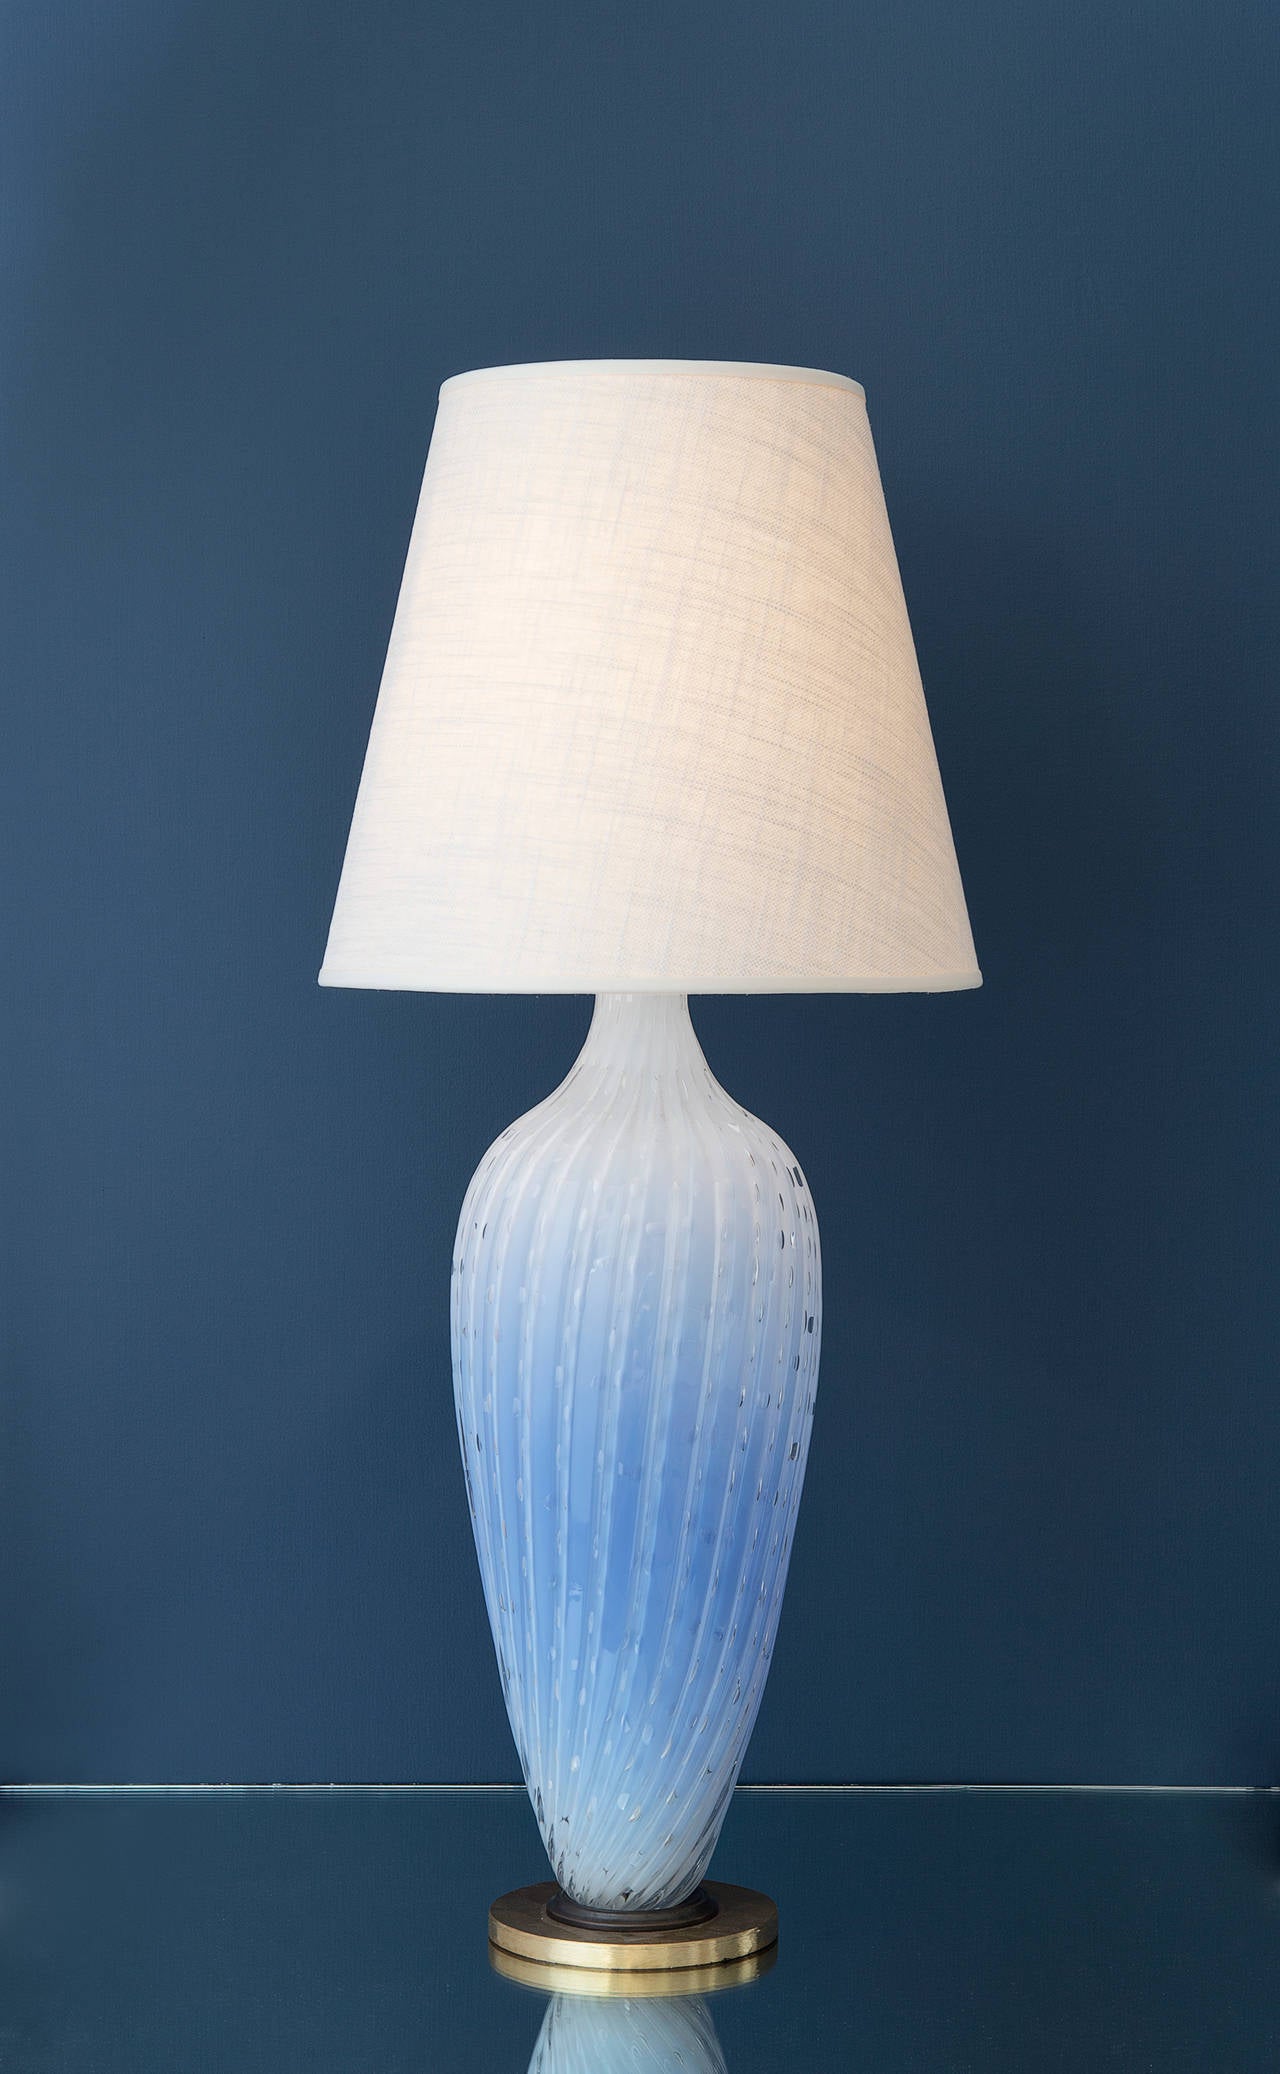 Exquisite Murano table lamp in dotted light blue glass and brass base. New linen shade.